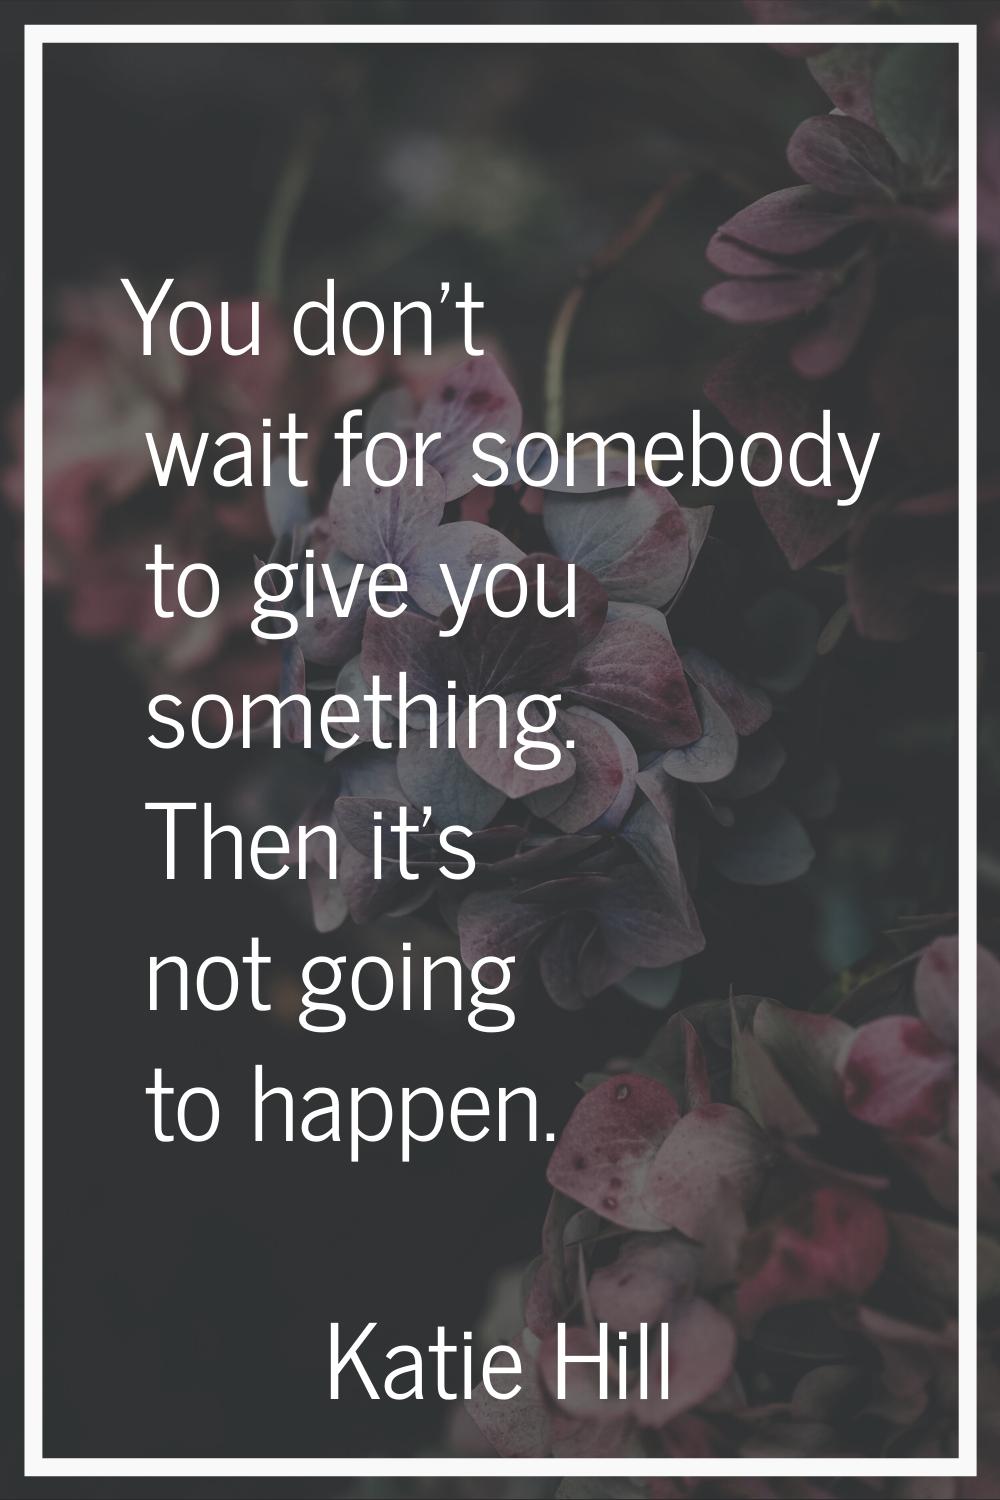 You don't wait for somebody to give you something. Then it's not going to happen.